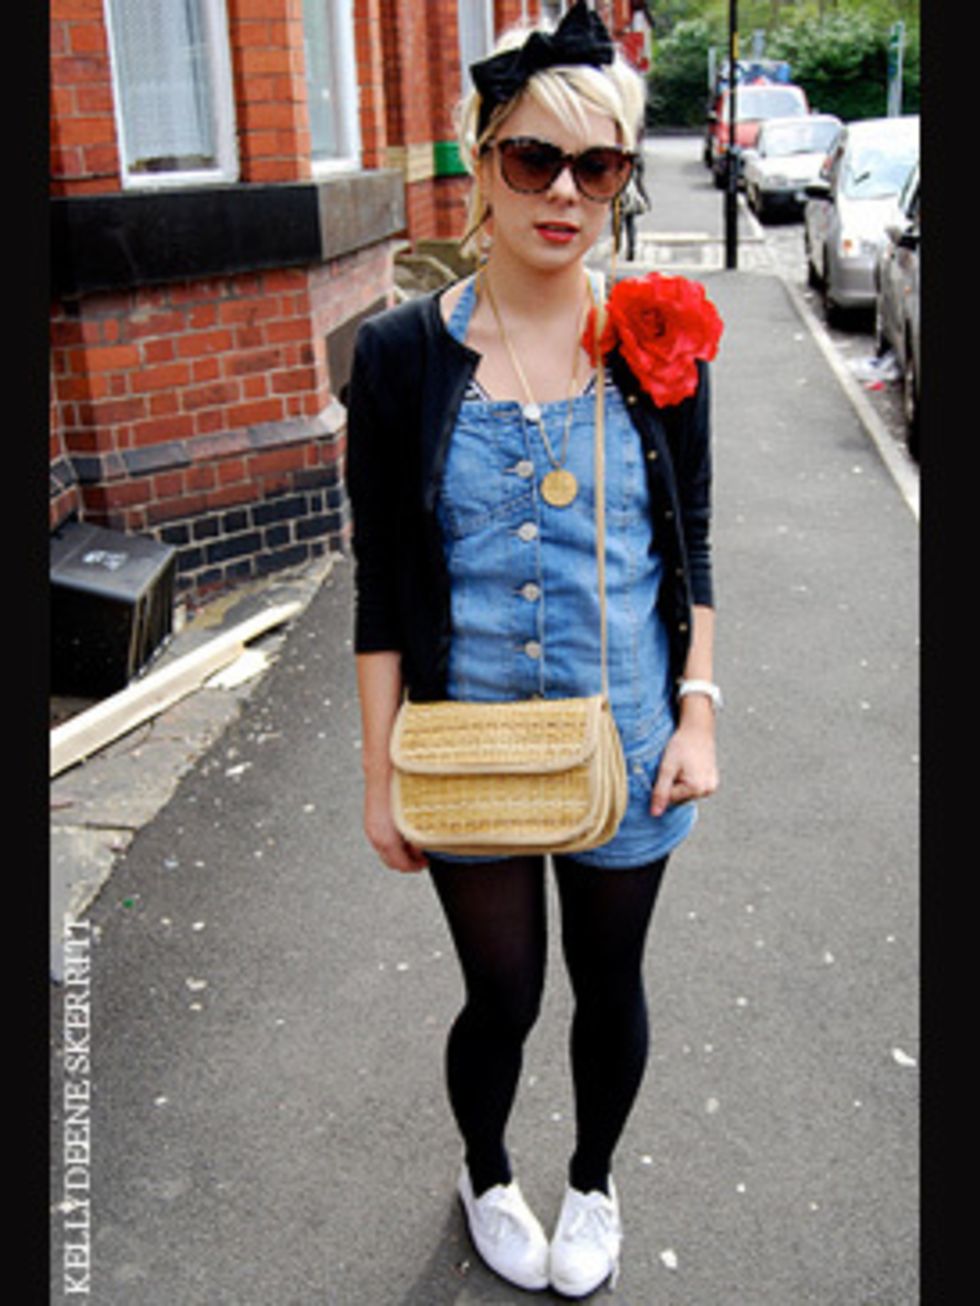 <p>This look ticks so many summer trend boxes: jumpsuit, check. Raffia bag, check. Floral corsage (very SATC), check. And, of course, headband, check. This eclectic layered look is a great way to stay summery and prepared for changing weather. And note of